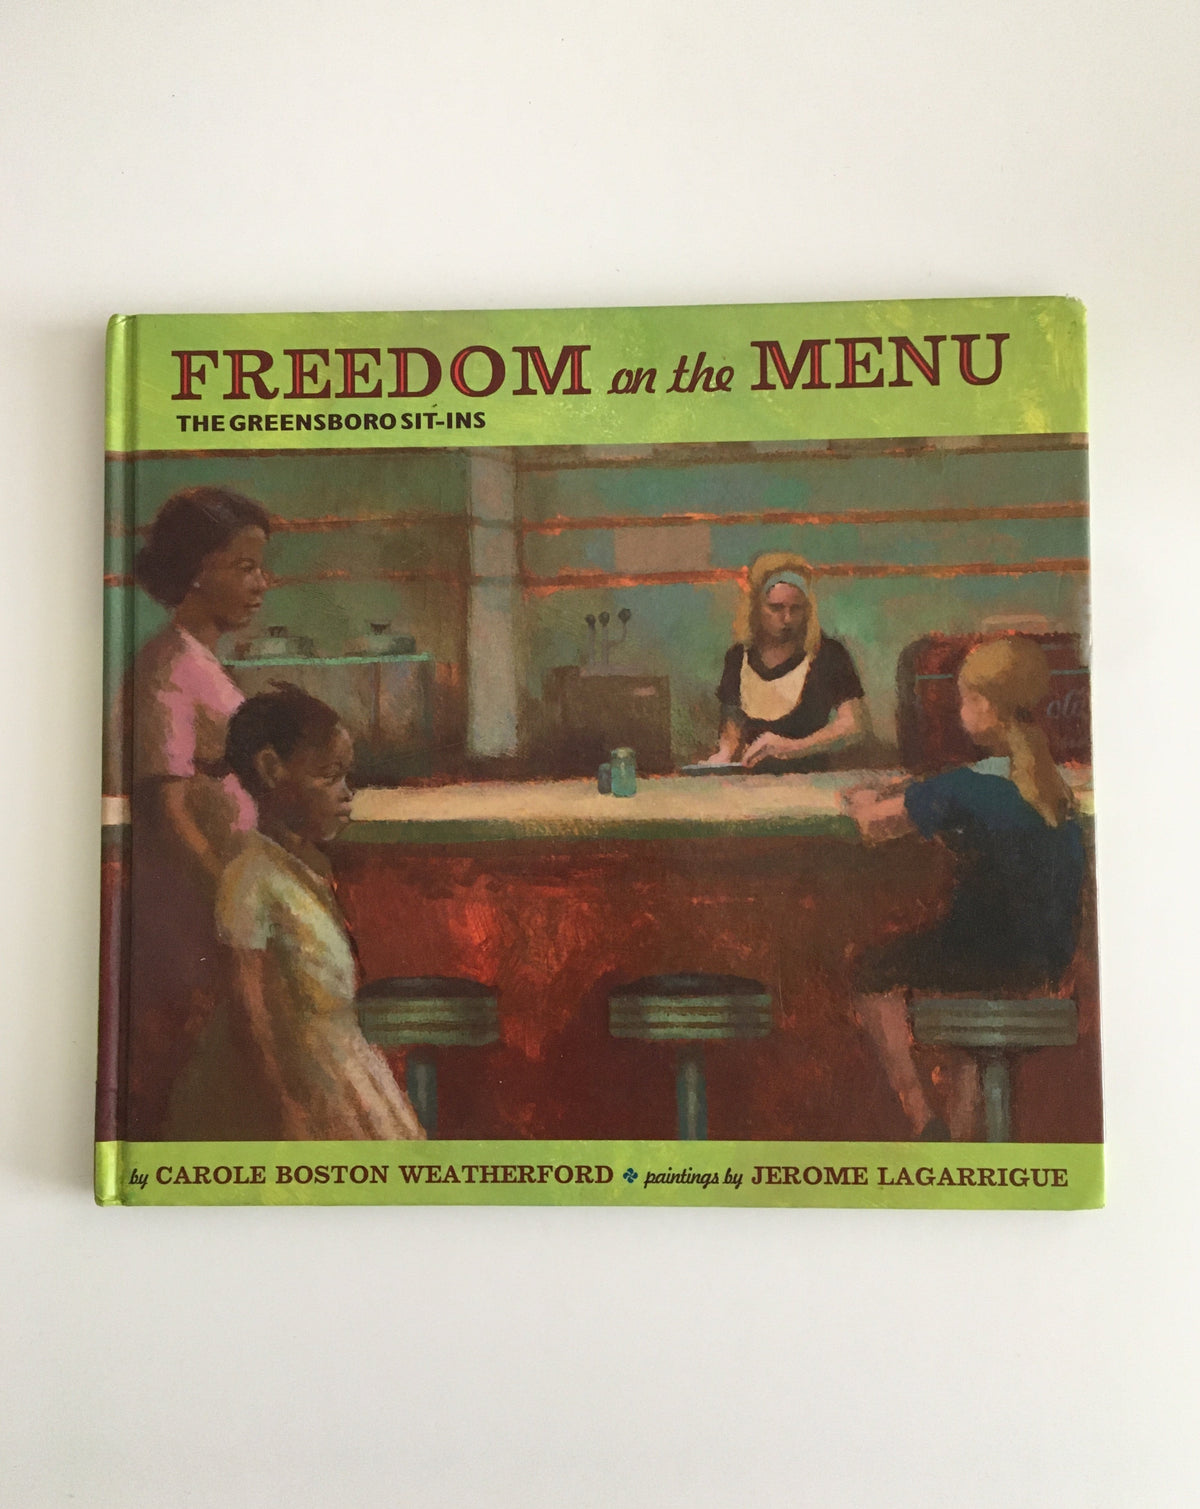 Freedom on the Menu: The Greensboro Sit-Ins by Carole Boston Weatherford &amp; Jerome Lagarrigue